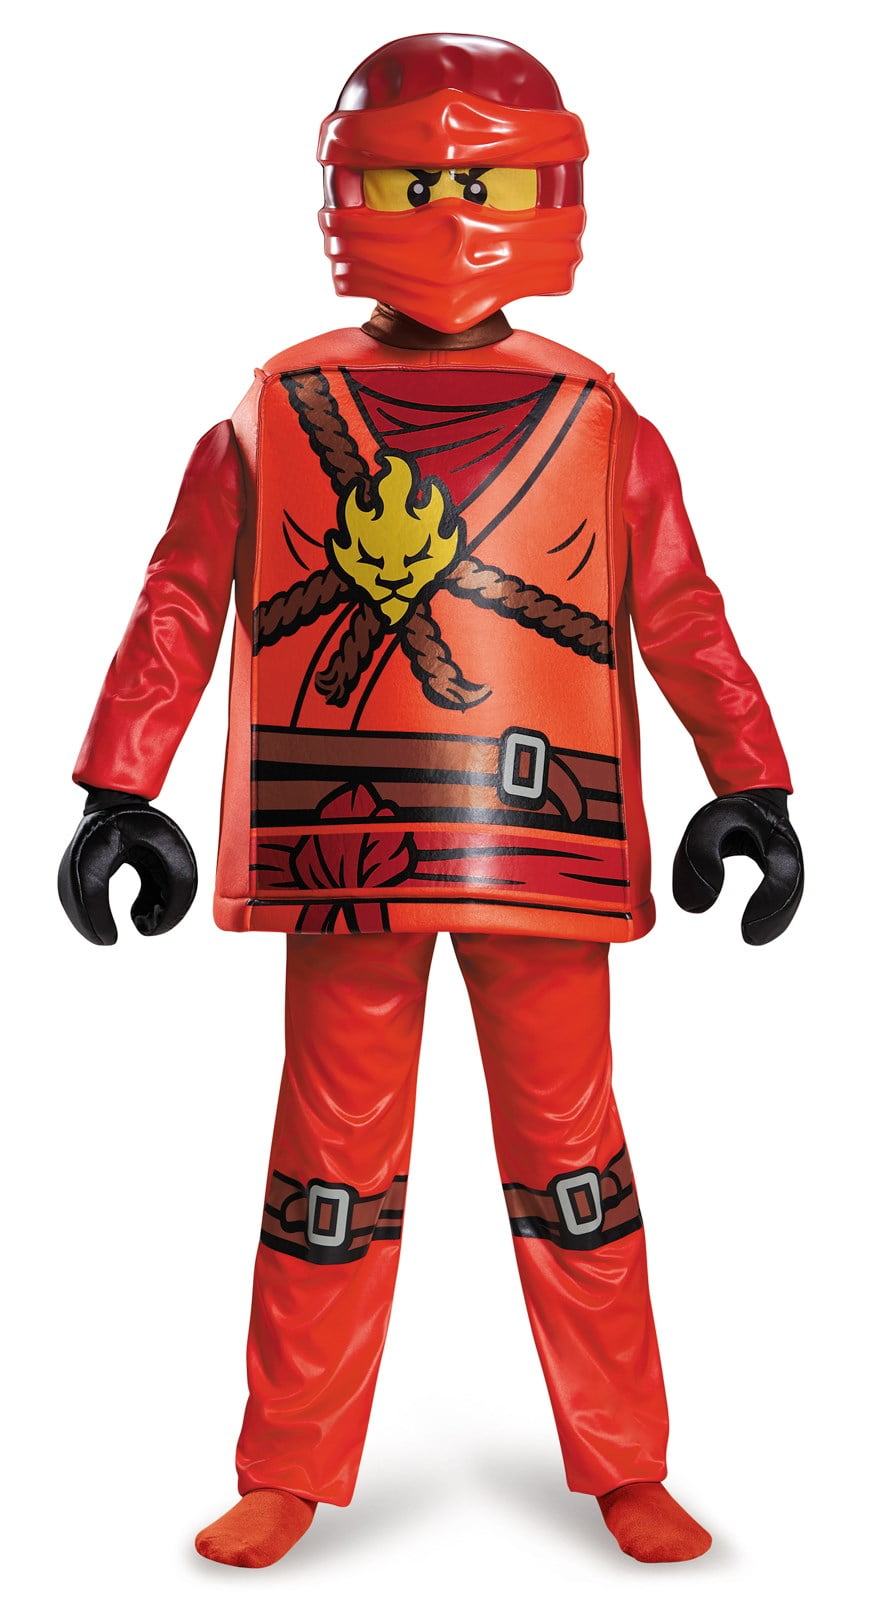 New Lego Red Ninjago Kai Child Costume One Size Fits Most M 7-8 